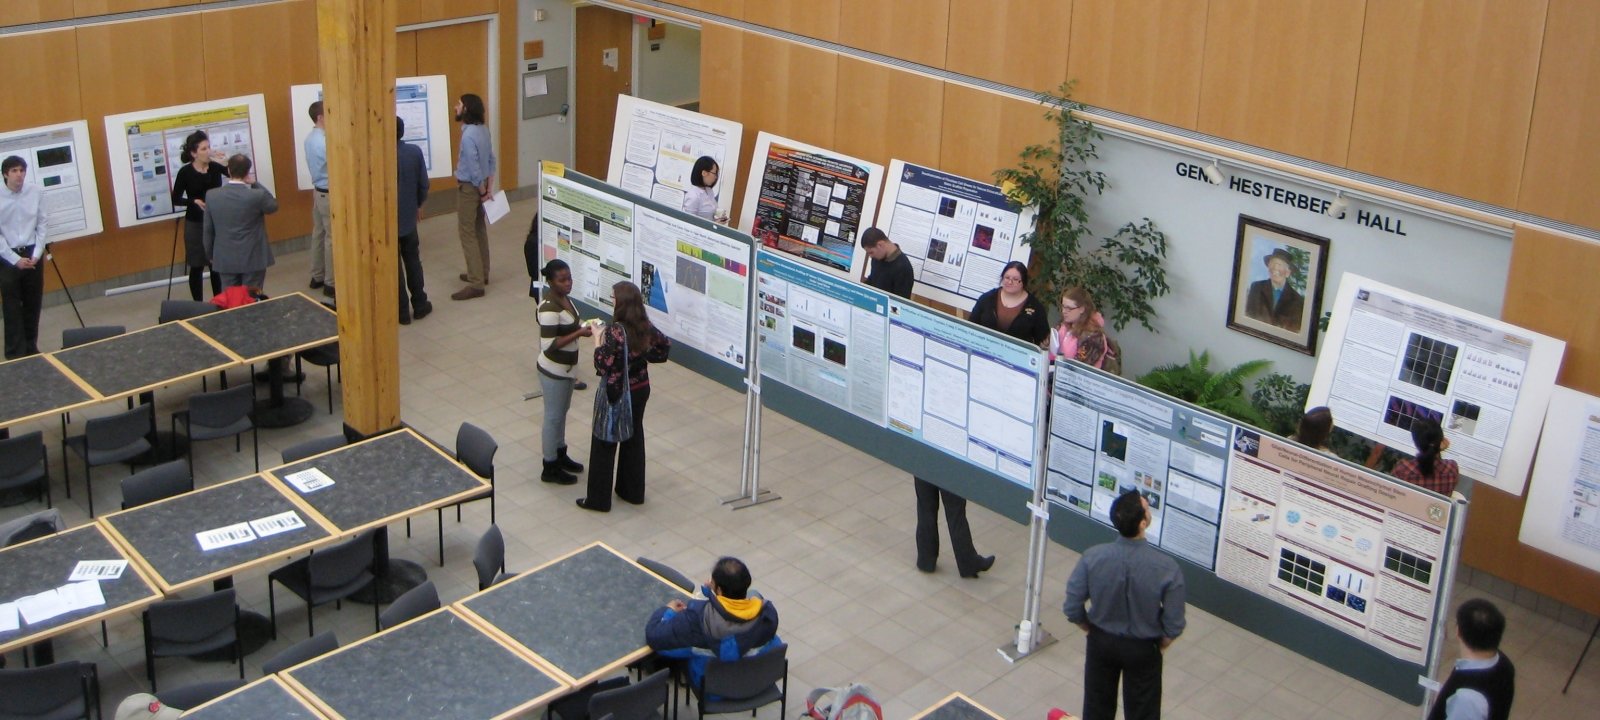 Students and faculty at poster session in the Noblet building atrium.